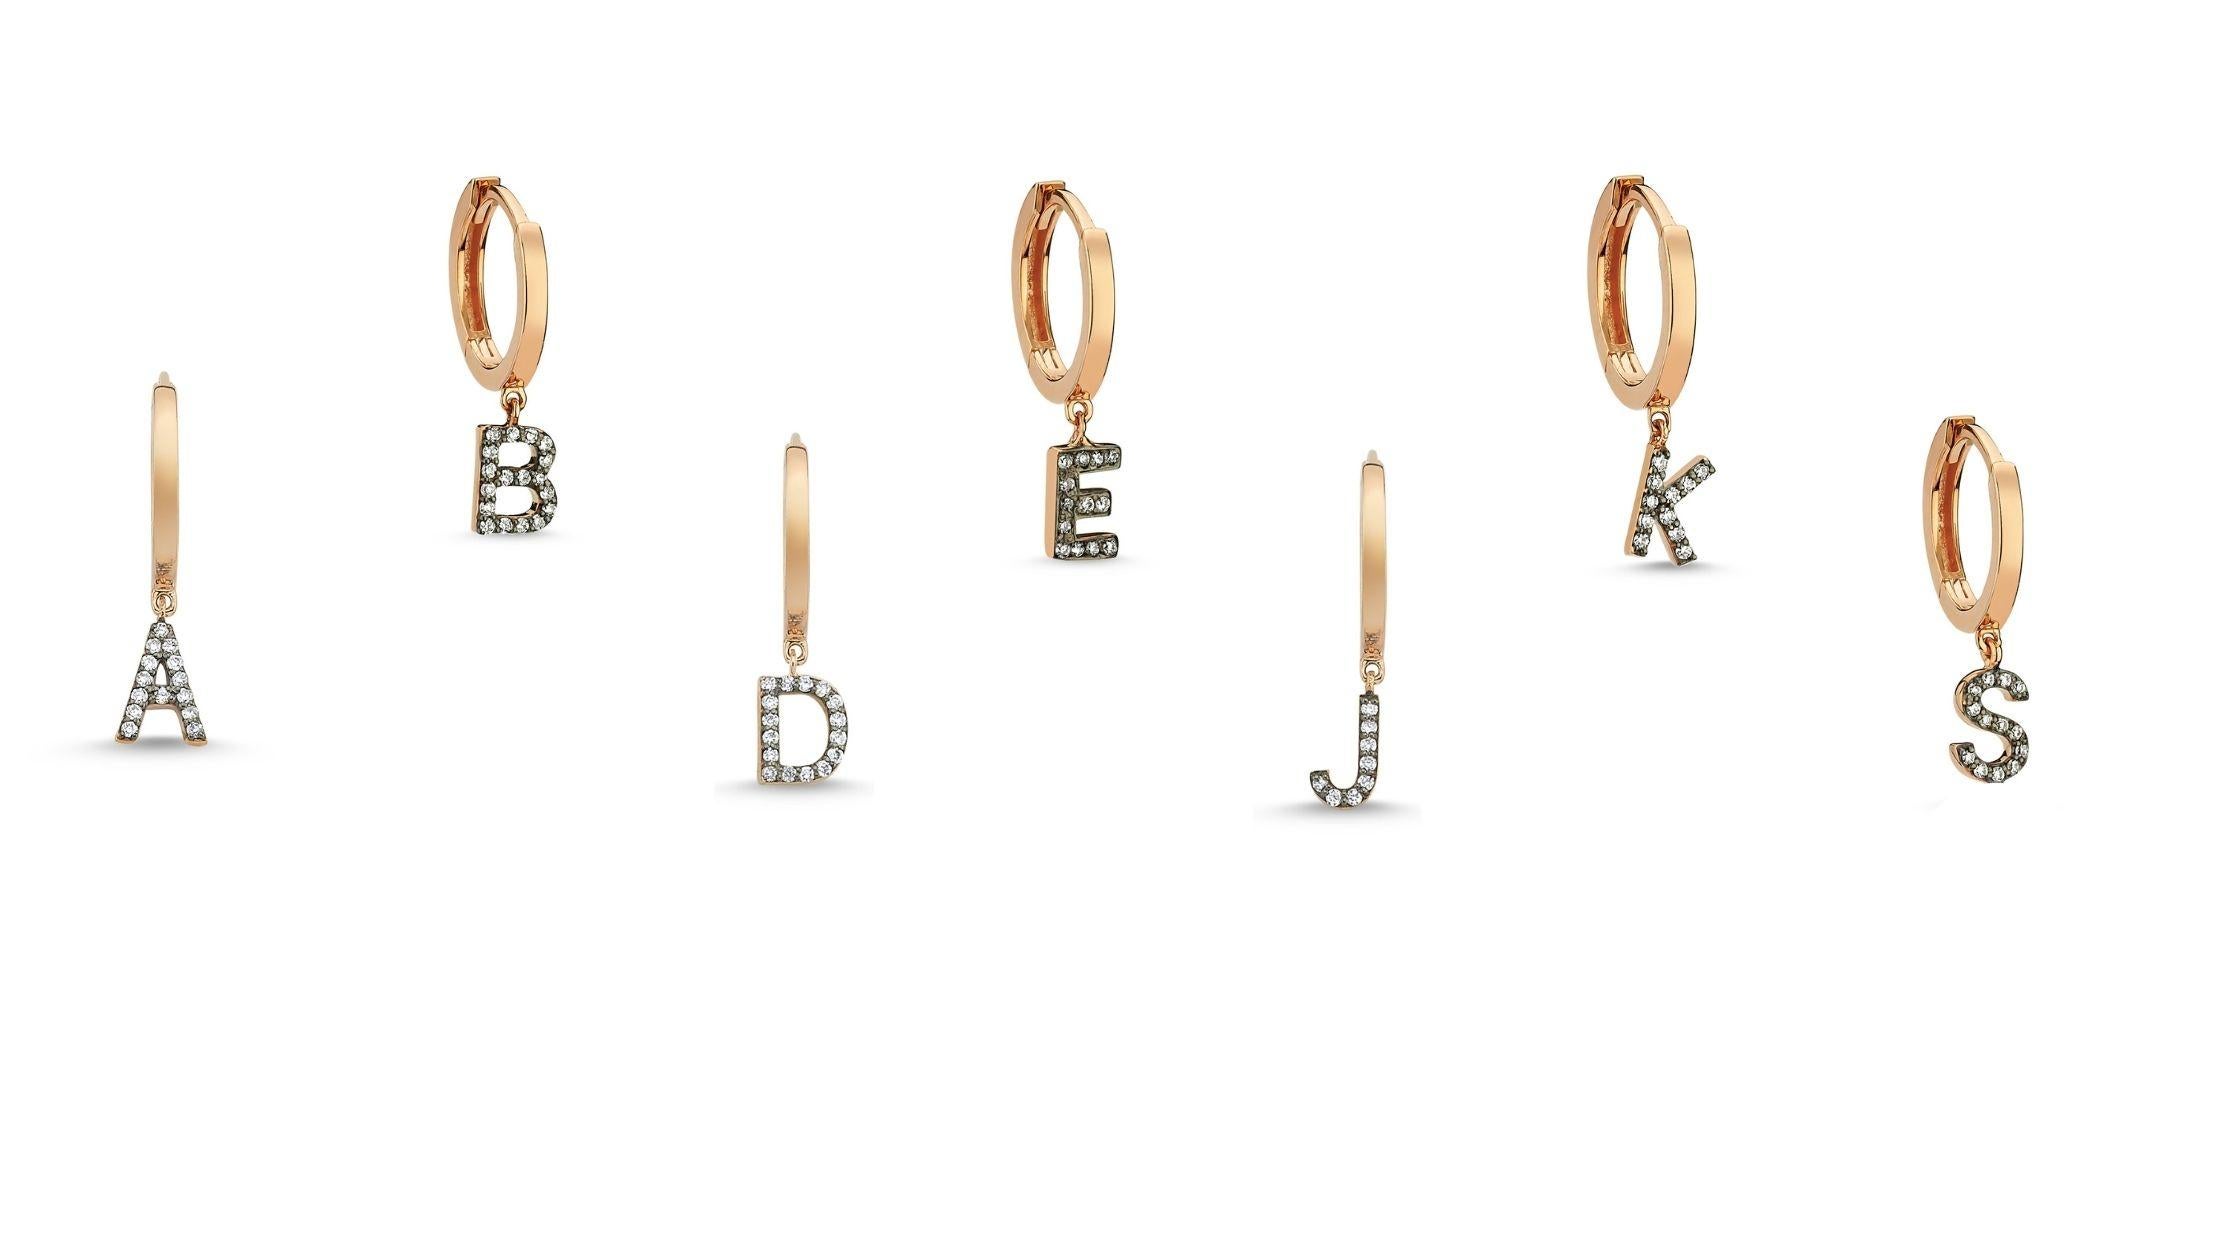 Letter I (single) 14k rose gold earring with white diamond by Selda Jewellery

Additional Information:-
Collection: Letter Collection
14k Rose gold
0.02ct White diamond
Letter height 1cm